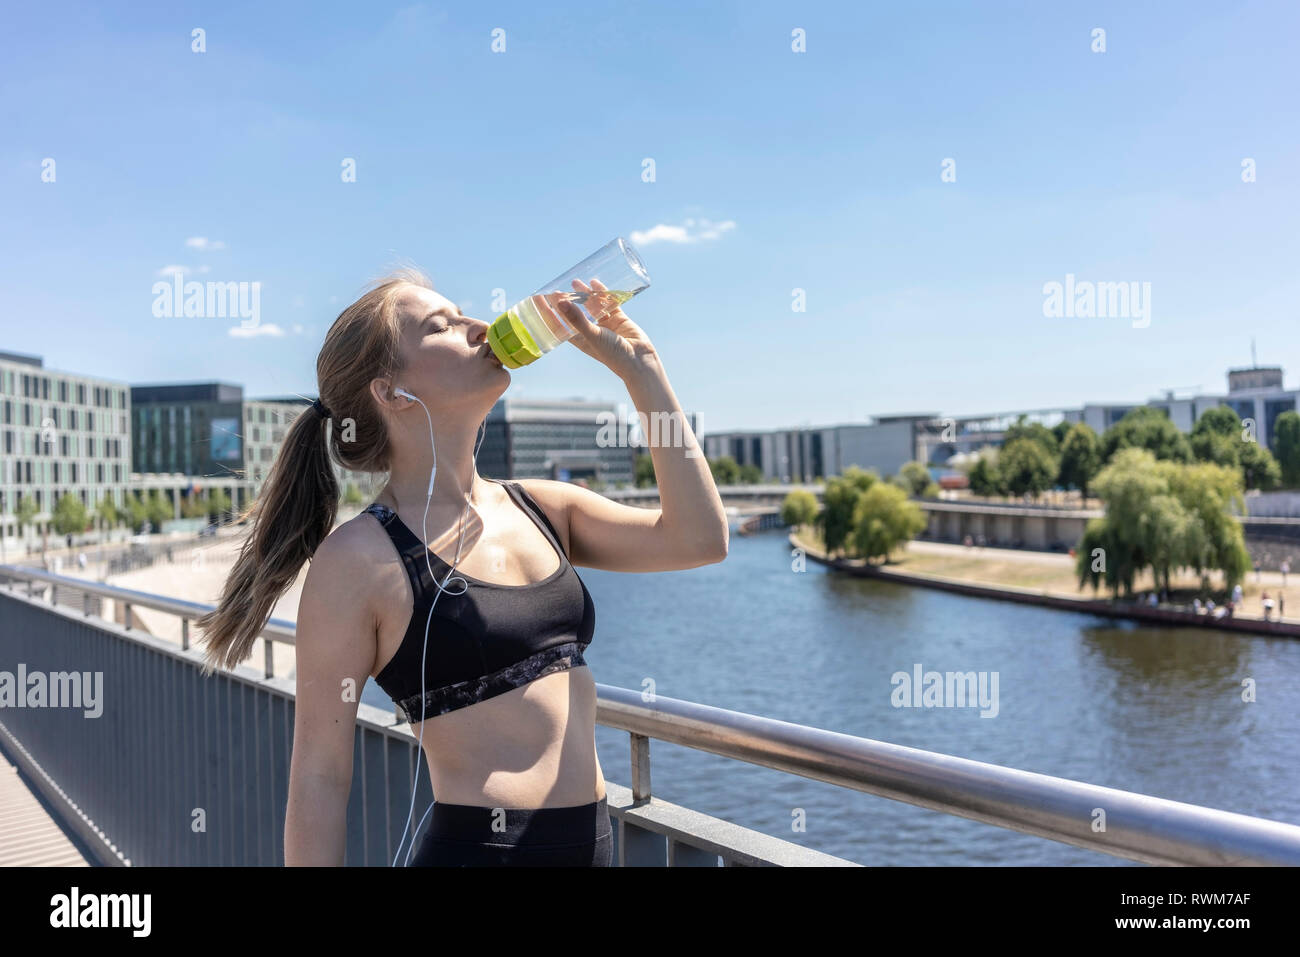 Young woman taking break from exercise and drinking water in city, Berlin, Germany Stock Photo